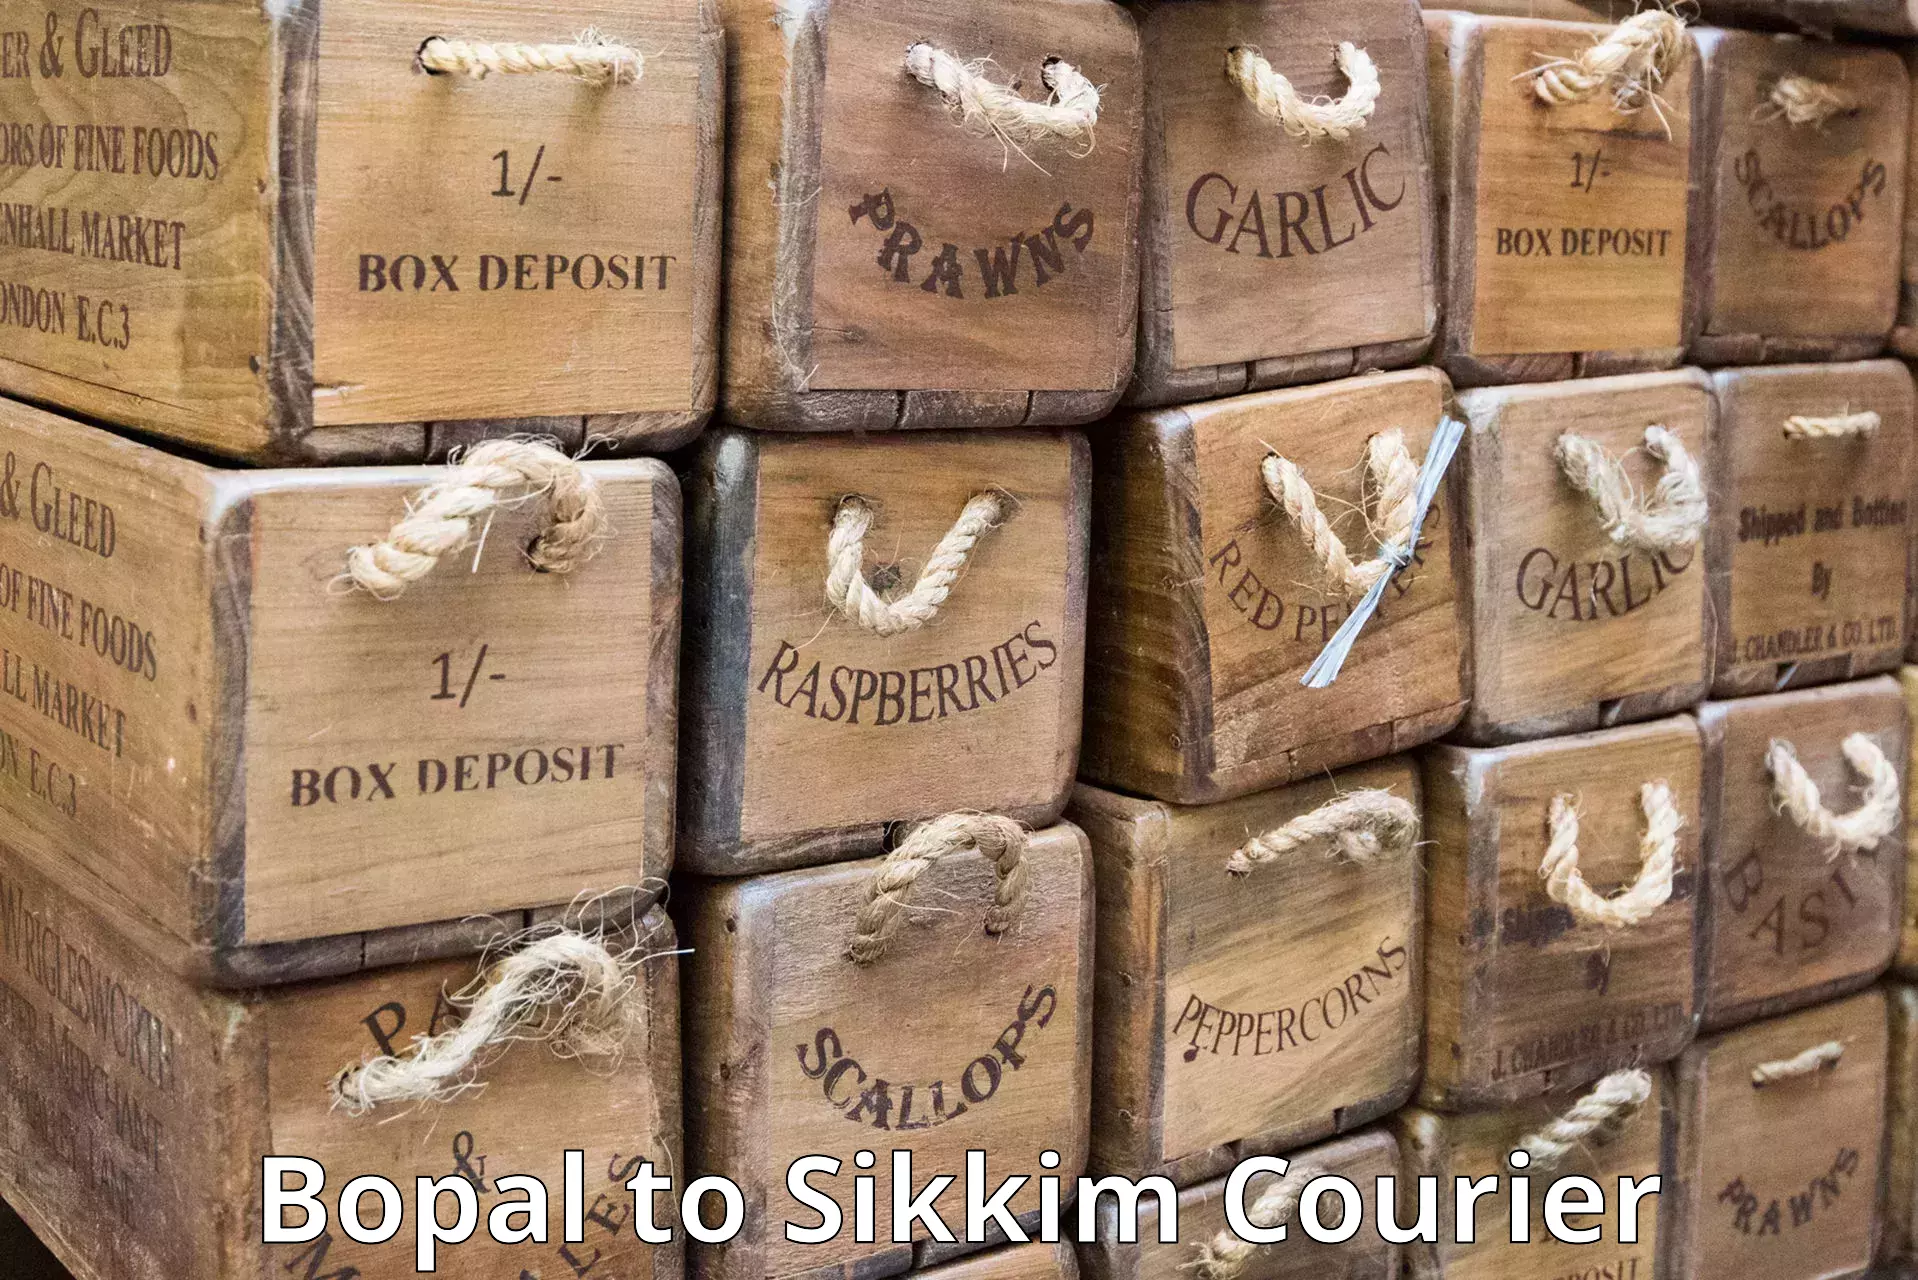 Express delivery capabilities Bopal to East Sikkim